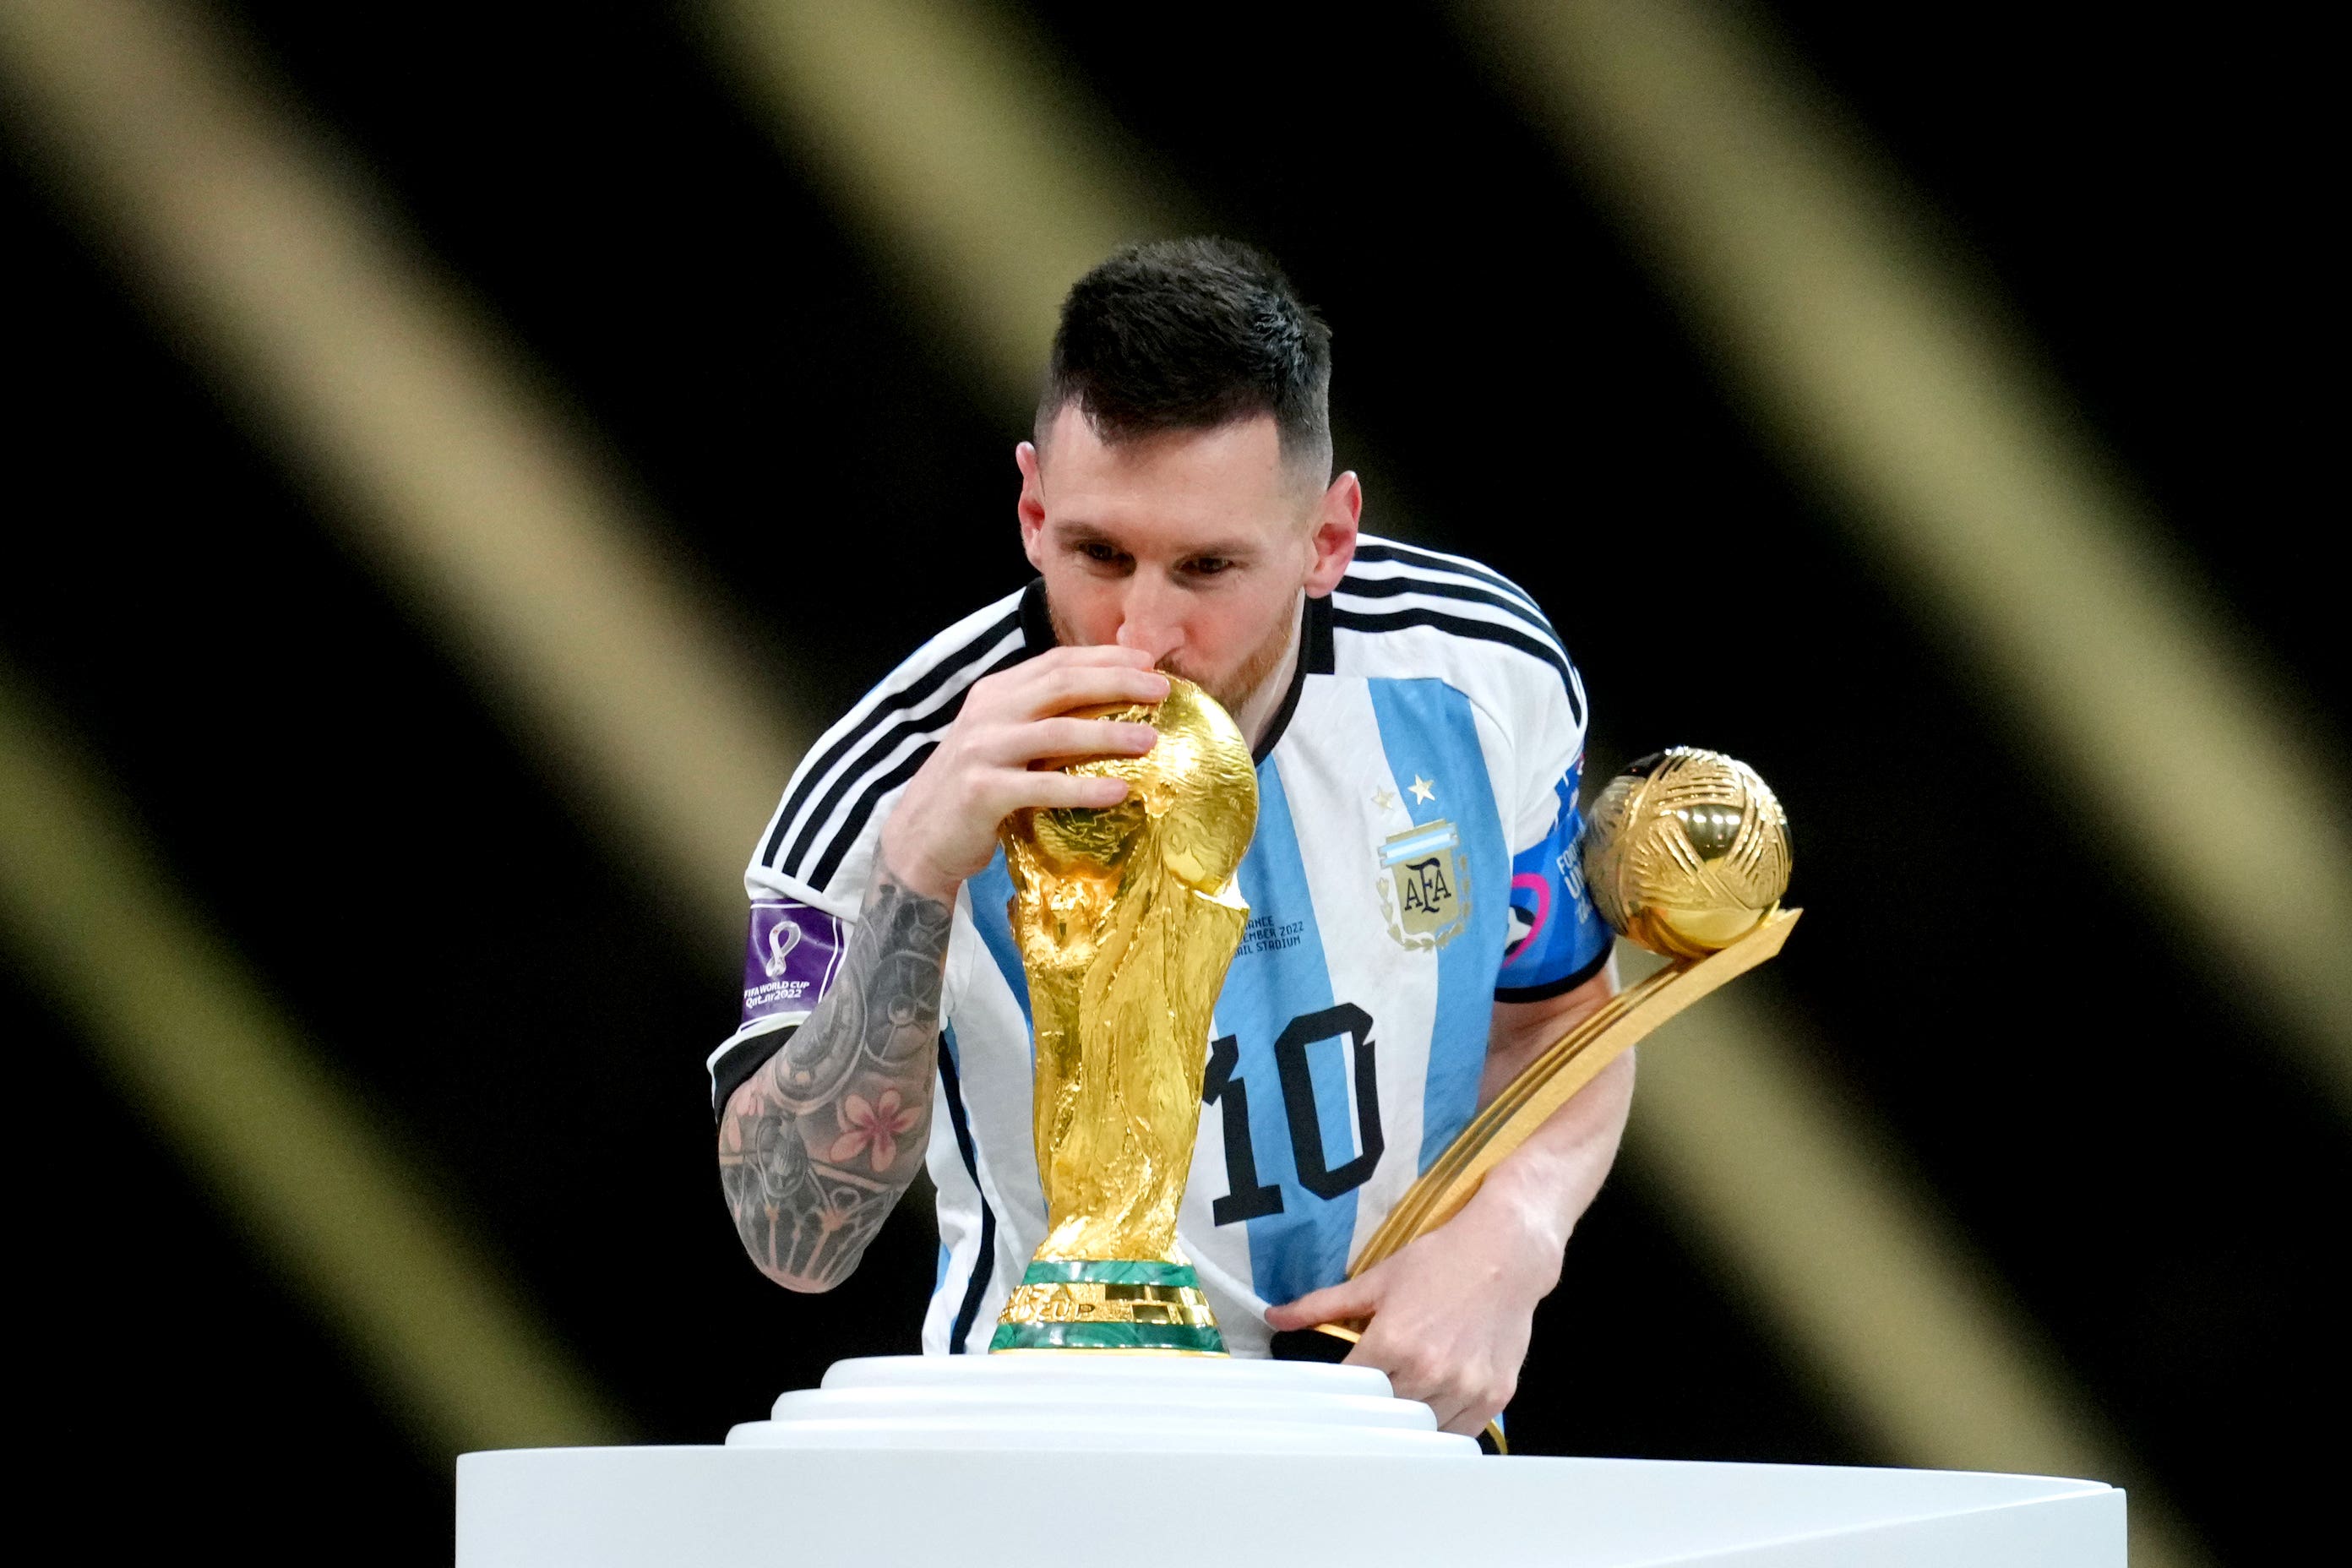 Messi enjoyed the greatest moment of his international career in December as he lifted the World Cup for Argentina